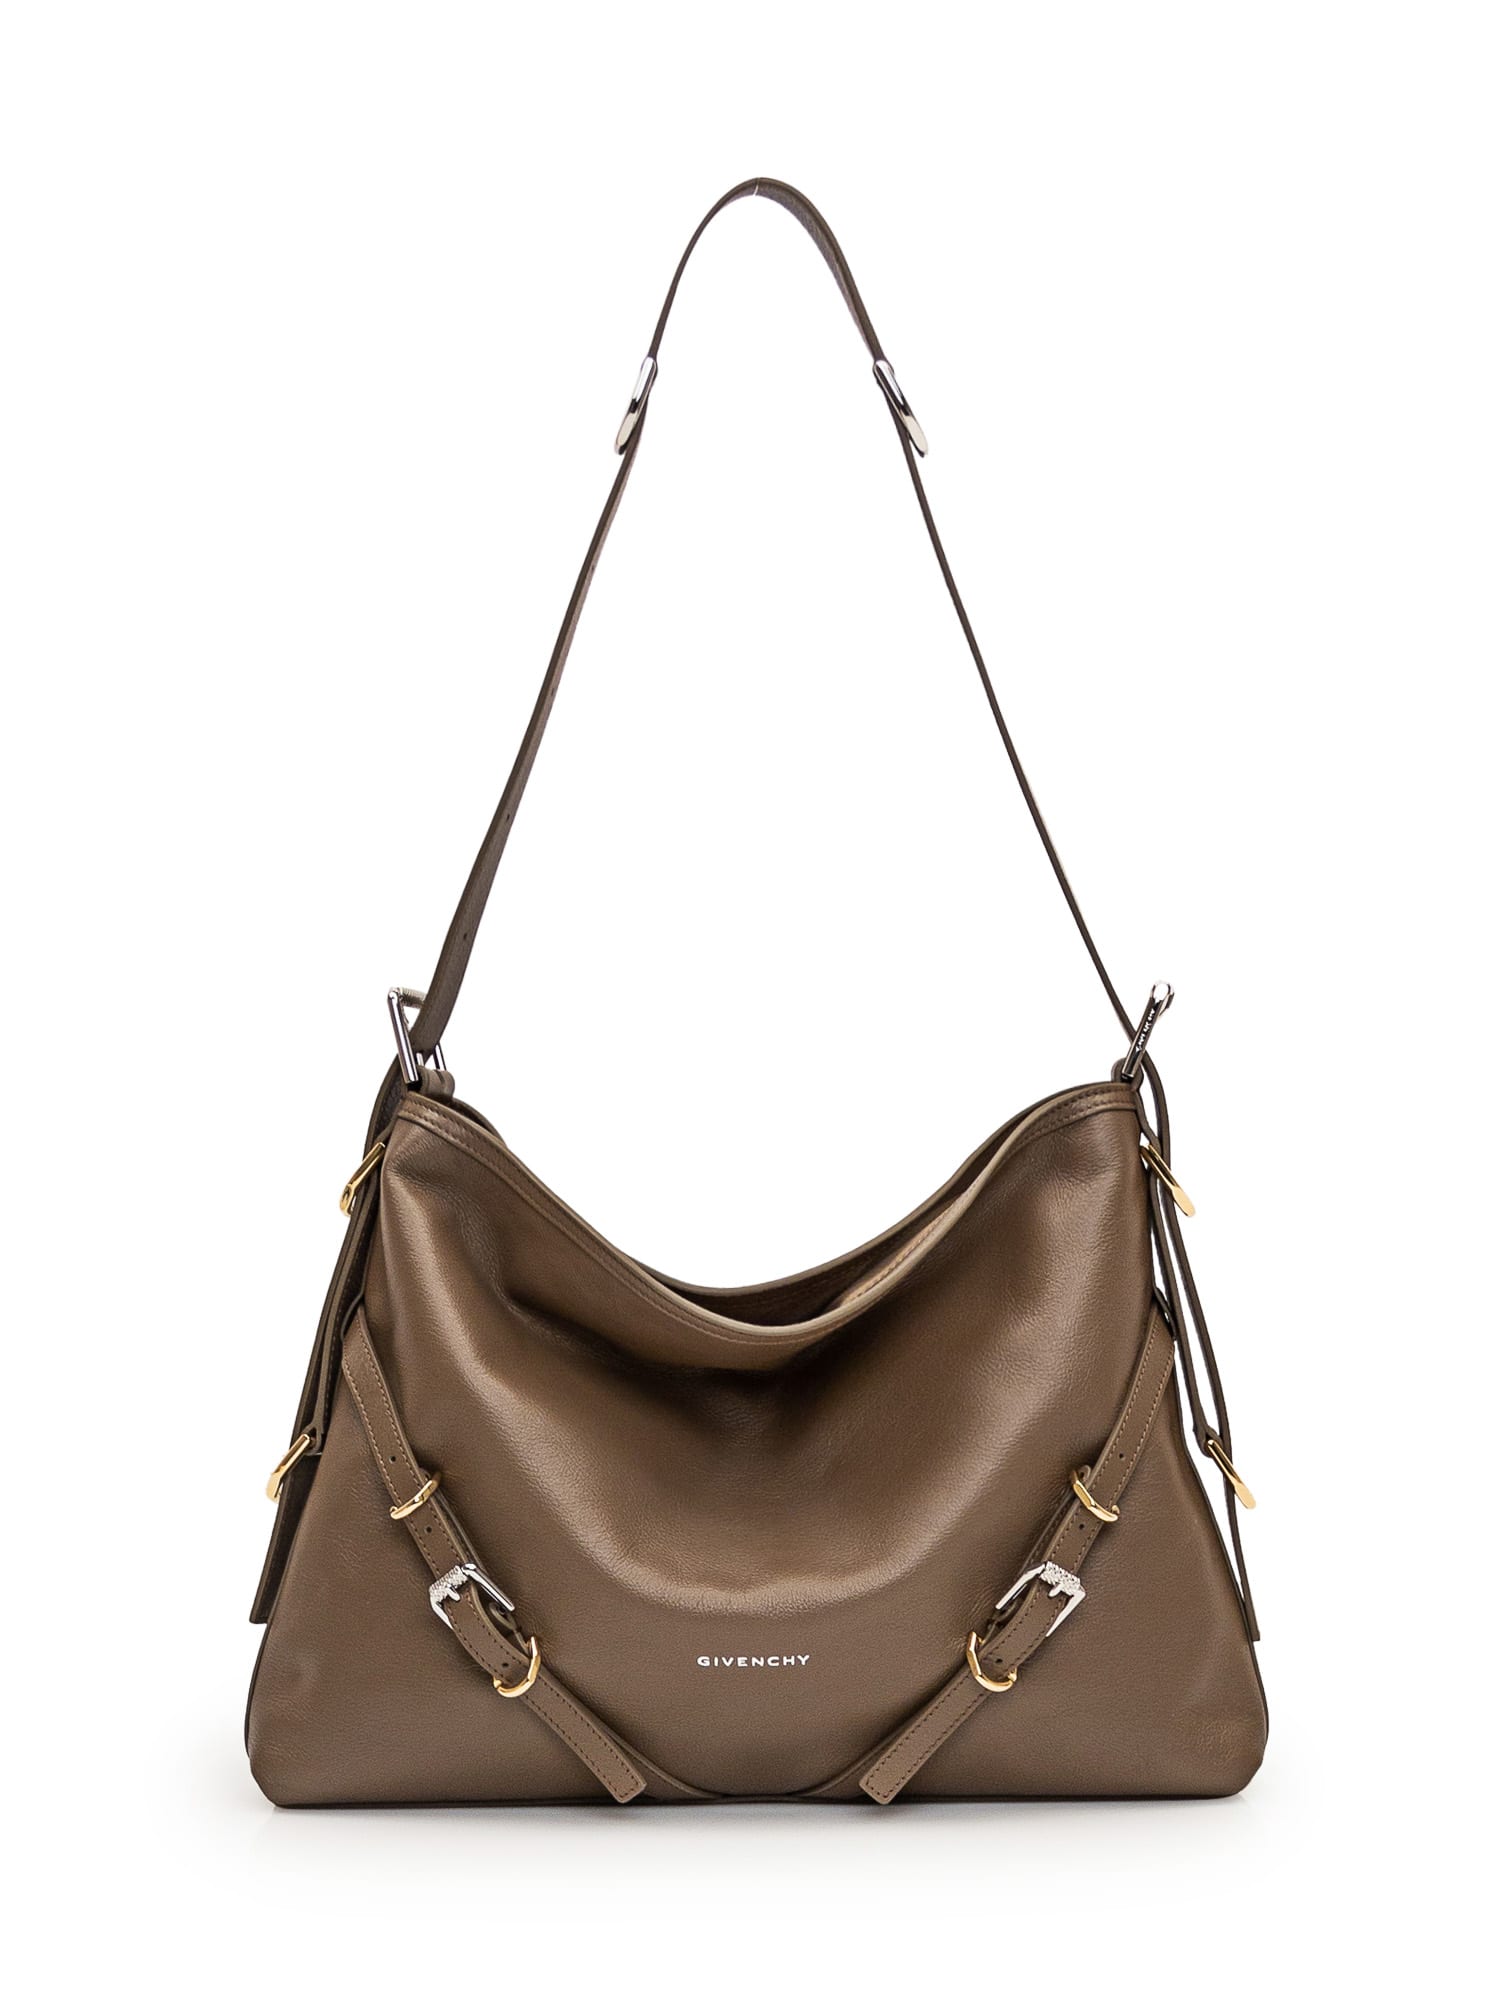 Givenchy Voyou Medium Bag In Taupe